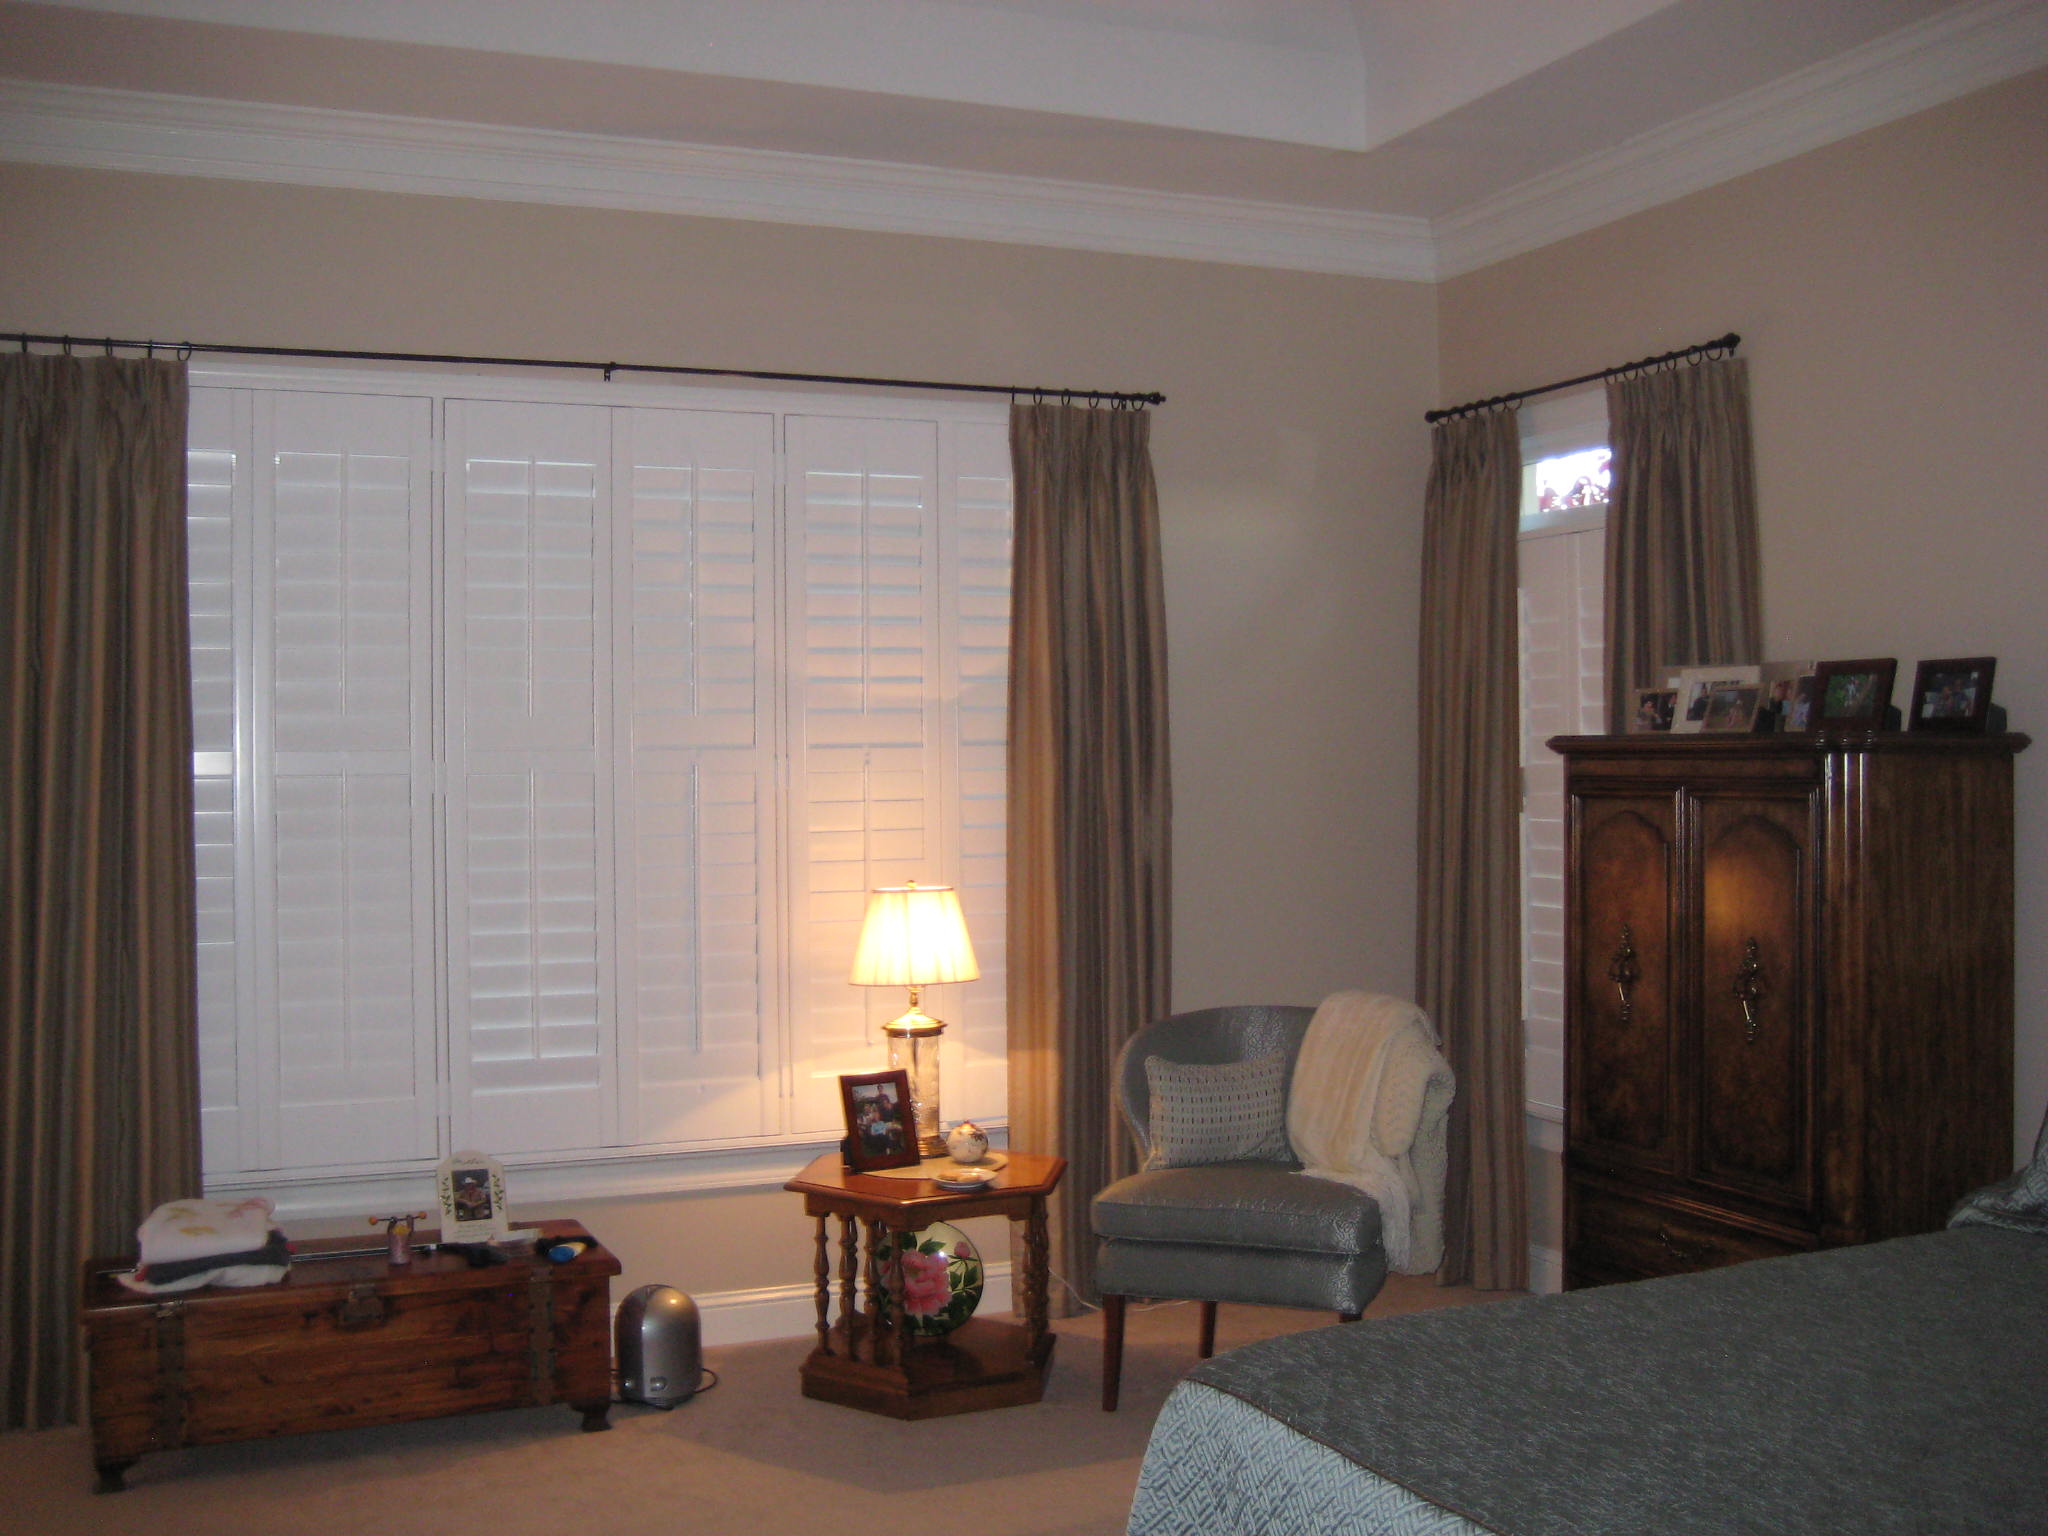 Bedroom Make over. Window treatment and shutters help insulate the home for the winter and summer.